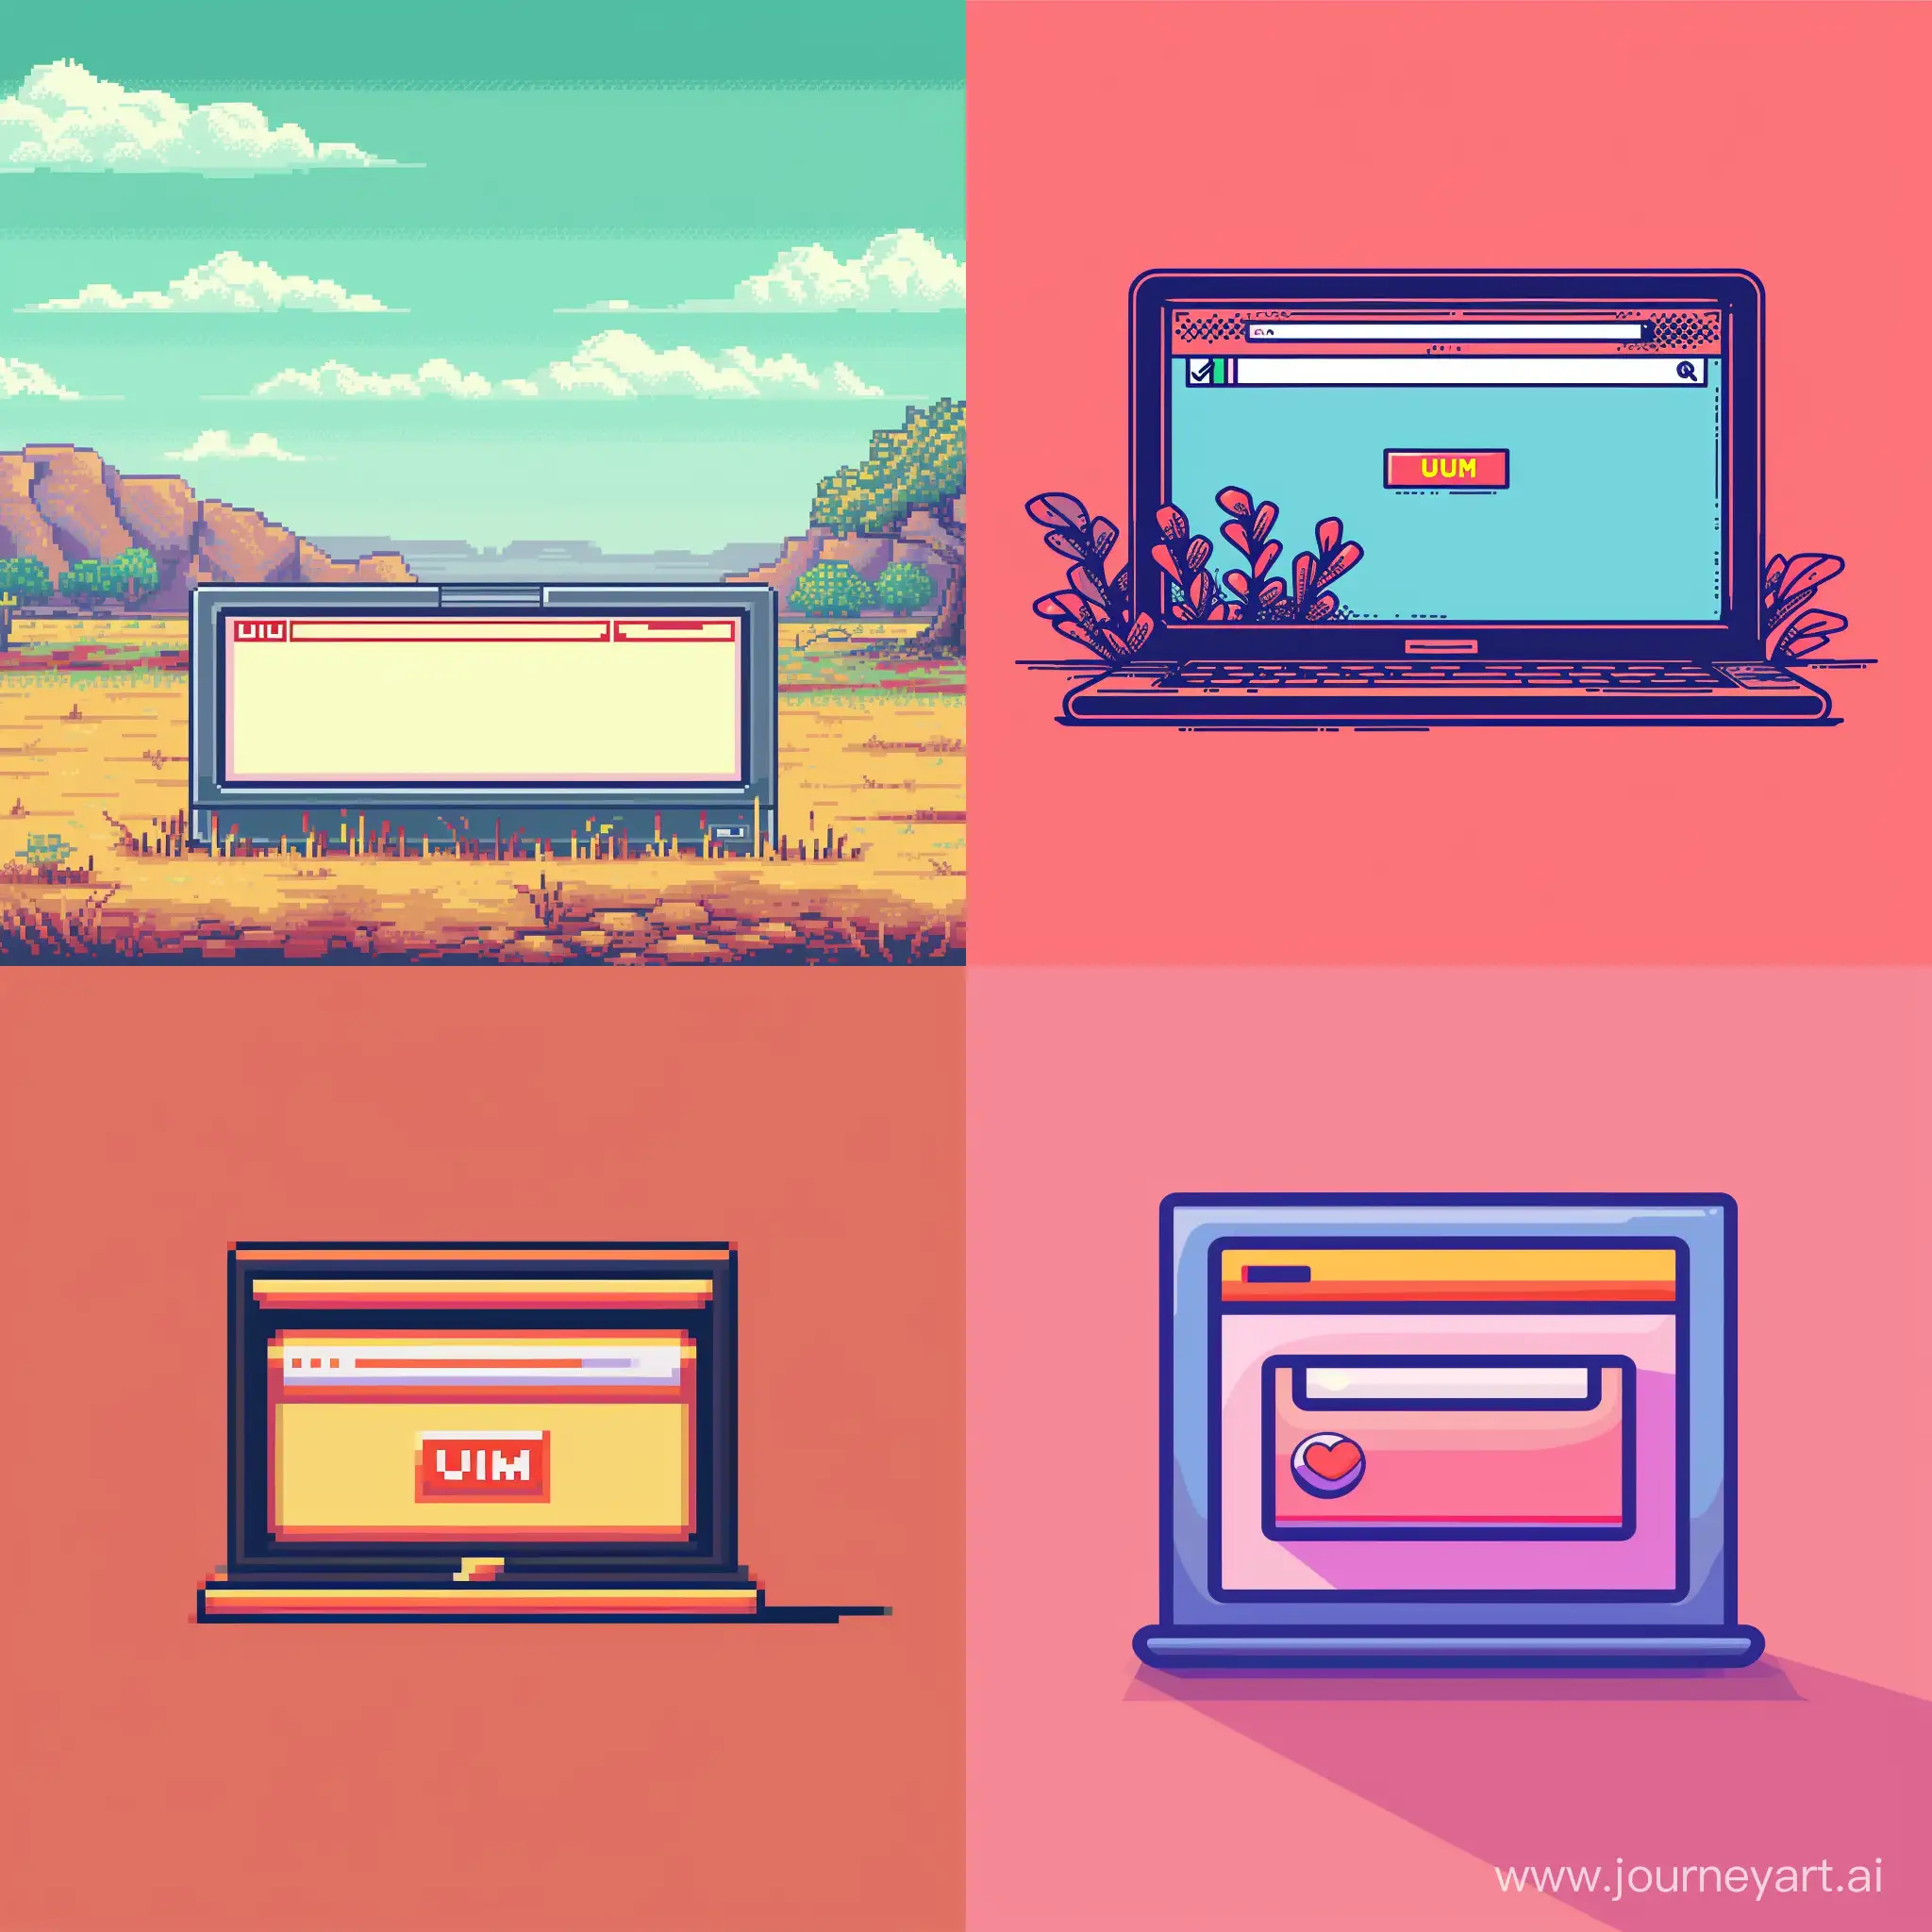 illustration 8-bit graphic image about "URL in browser" with a plain color background